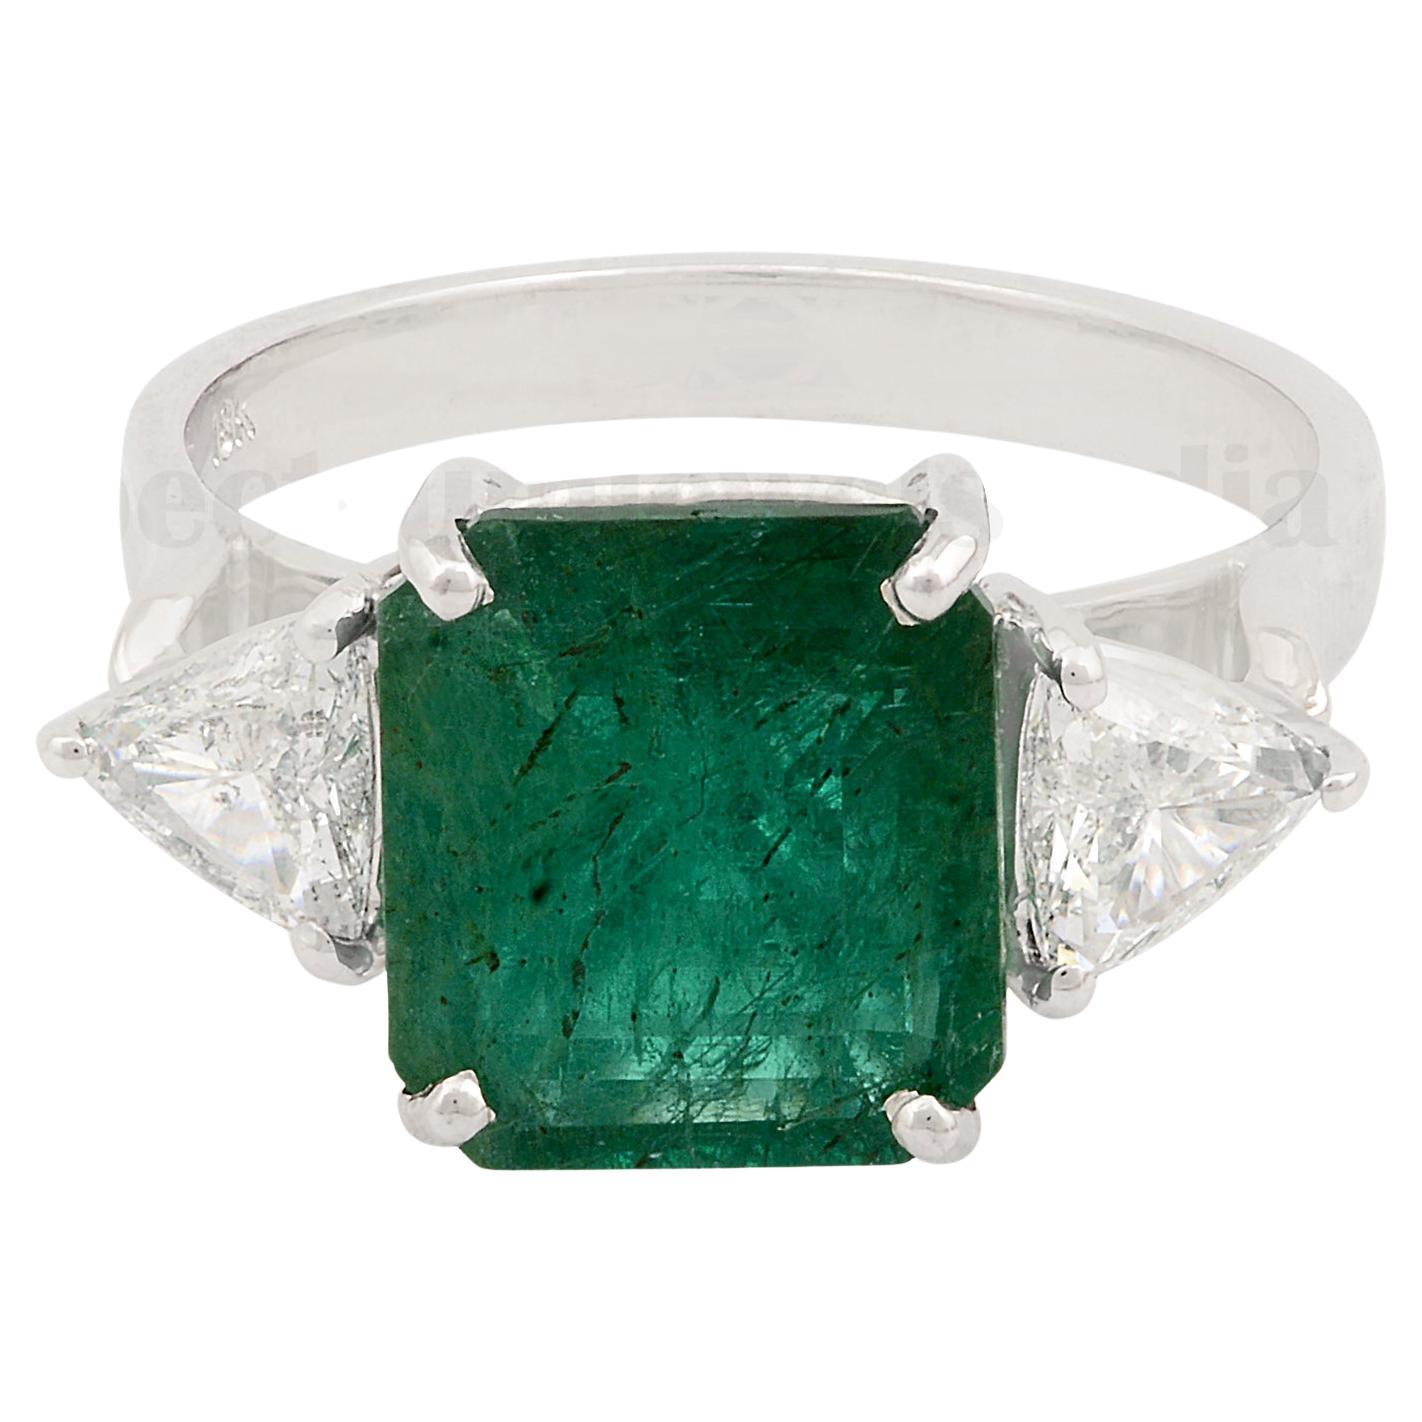 For Sale:  Natural Emerald Gemstone Cocktail Ring Pear Diamond Solid 18k White Gold Jewelry